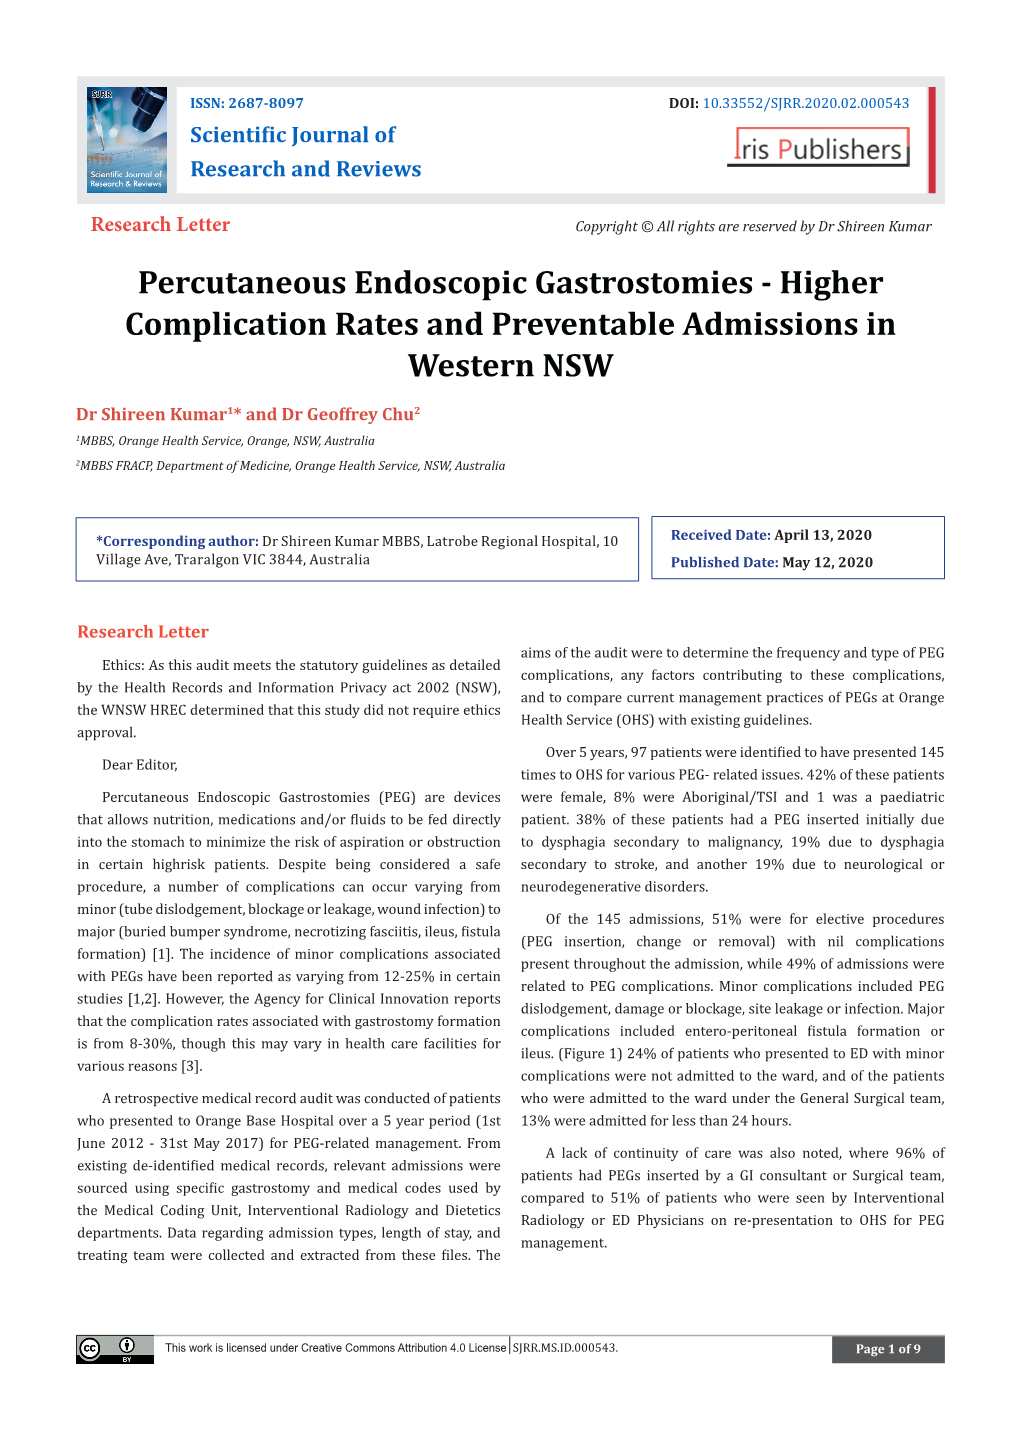 Percutaneous Endoscopic Gastrostomies - Higher Complication Rates and Preventable Admissions in Western NSW